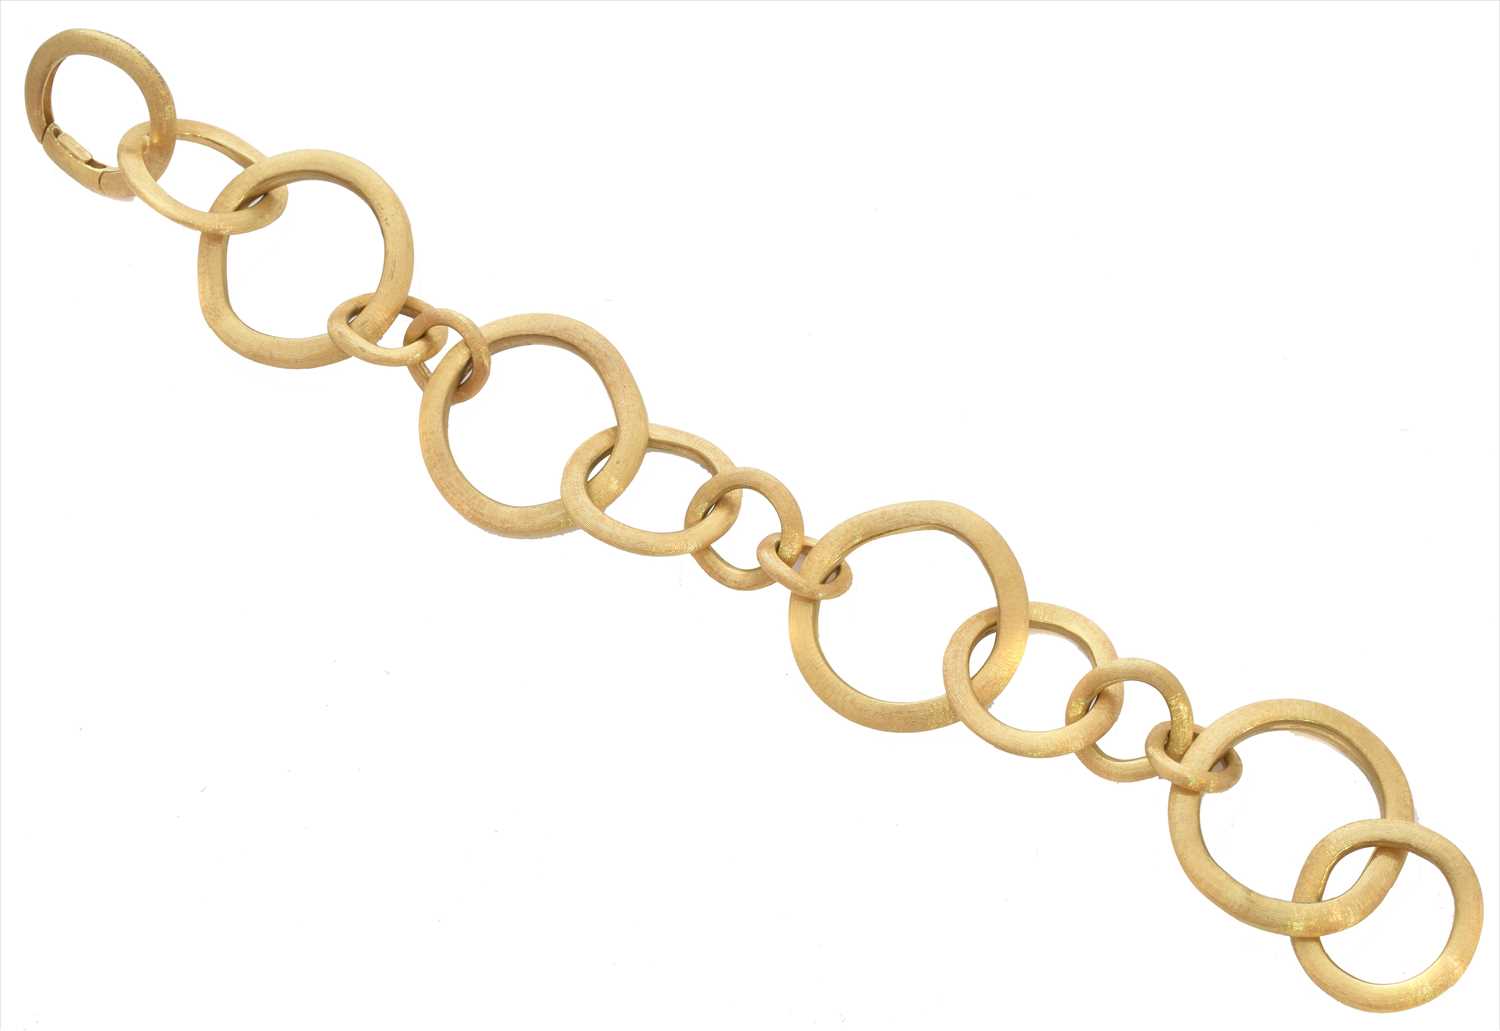 An 18ct gold 'Jaipur' bracelet by Marco Bicego, - Image 2 of 2